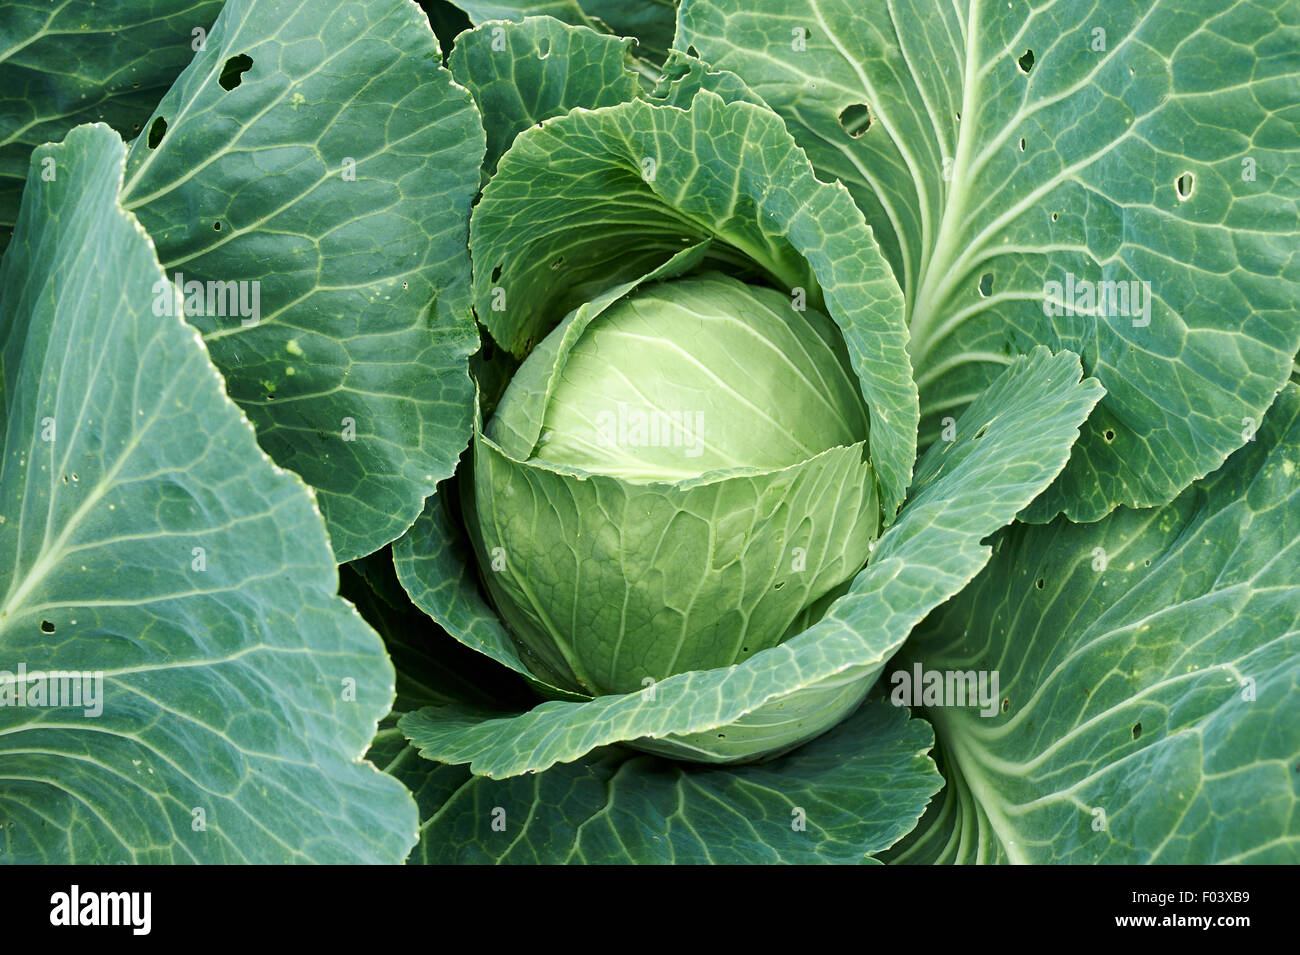 Mature Cabbage plants growing and ready for harvesting in a vegetable garden. Stock Photo